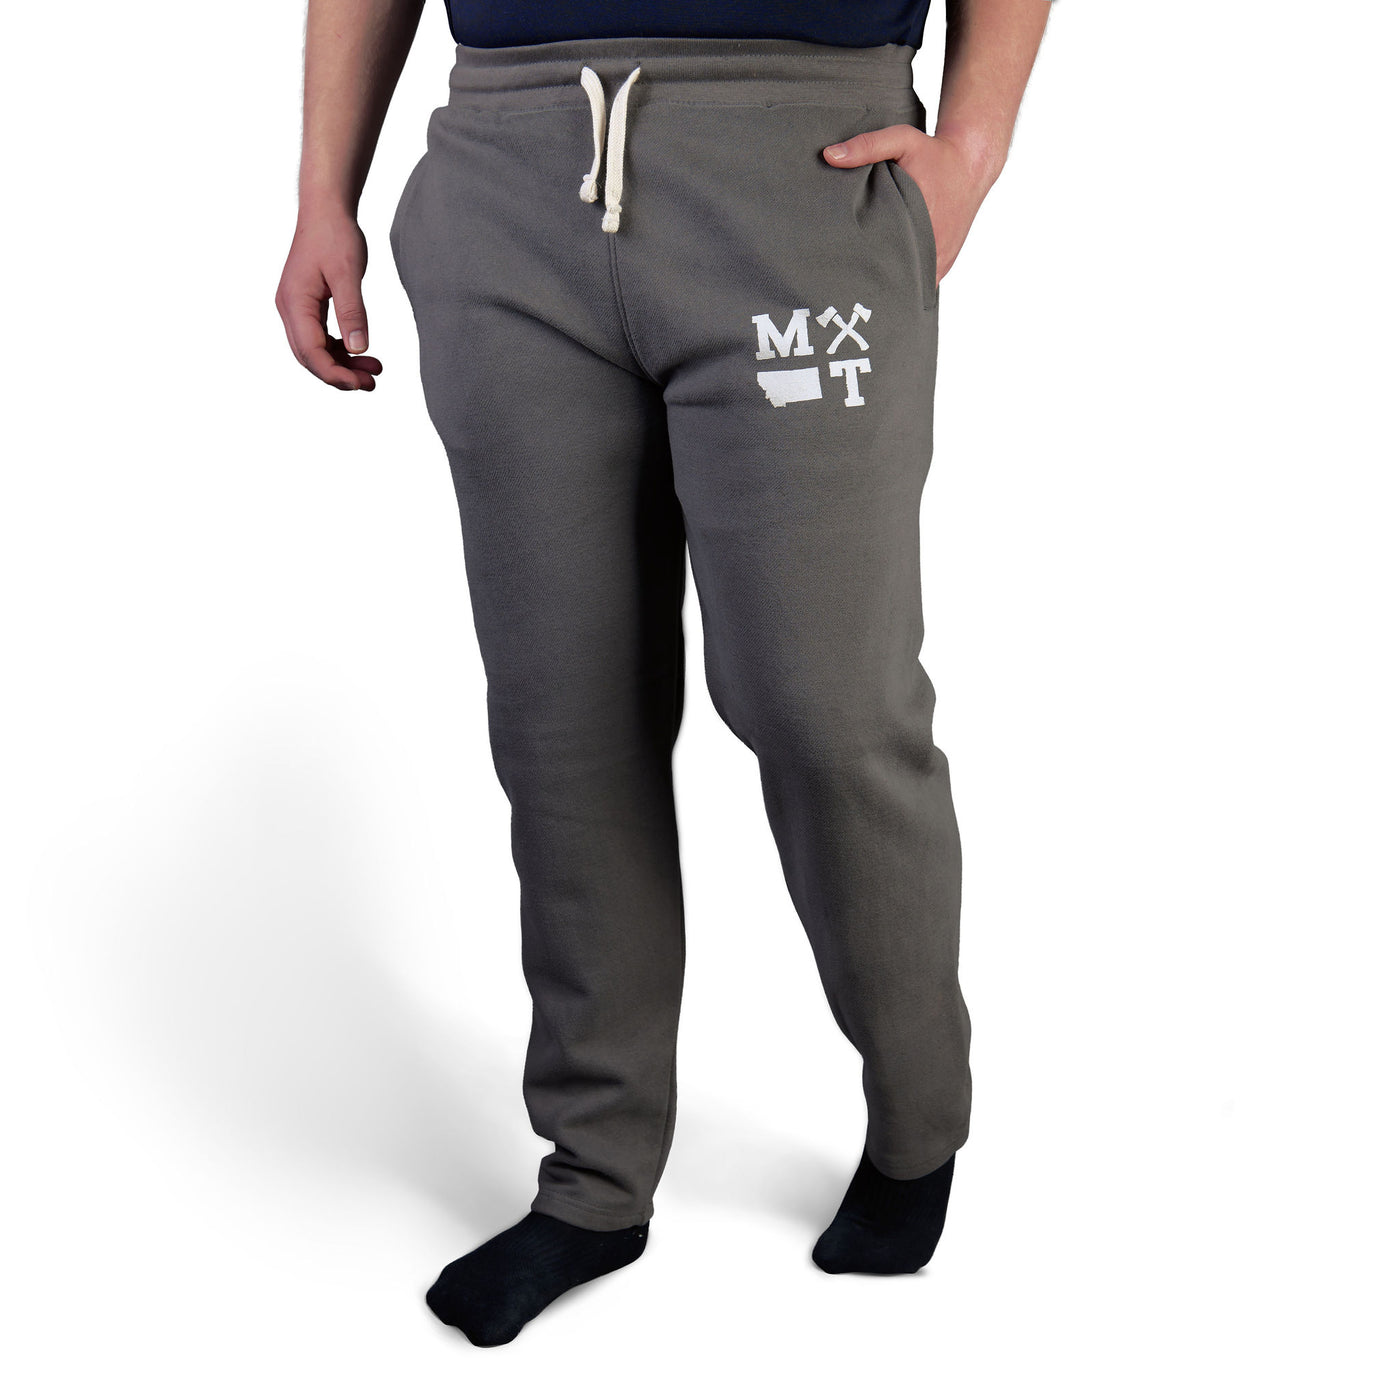 The Icons Vintage Fleece Pants in Graphite – The Montana Way